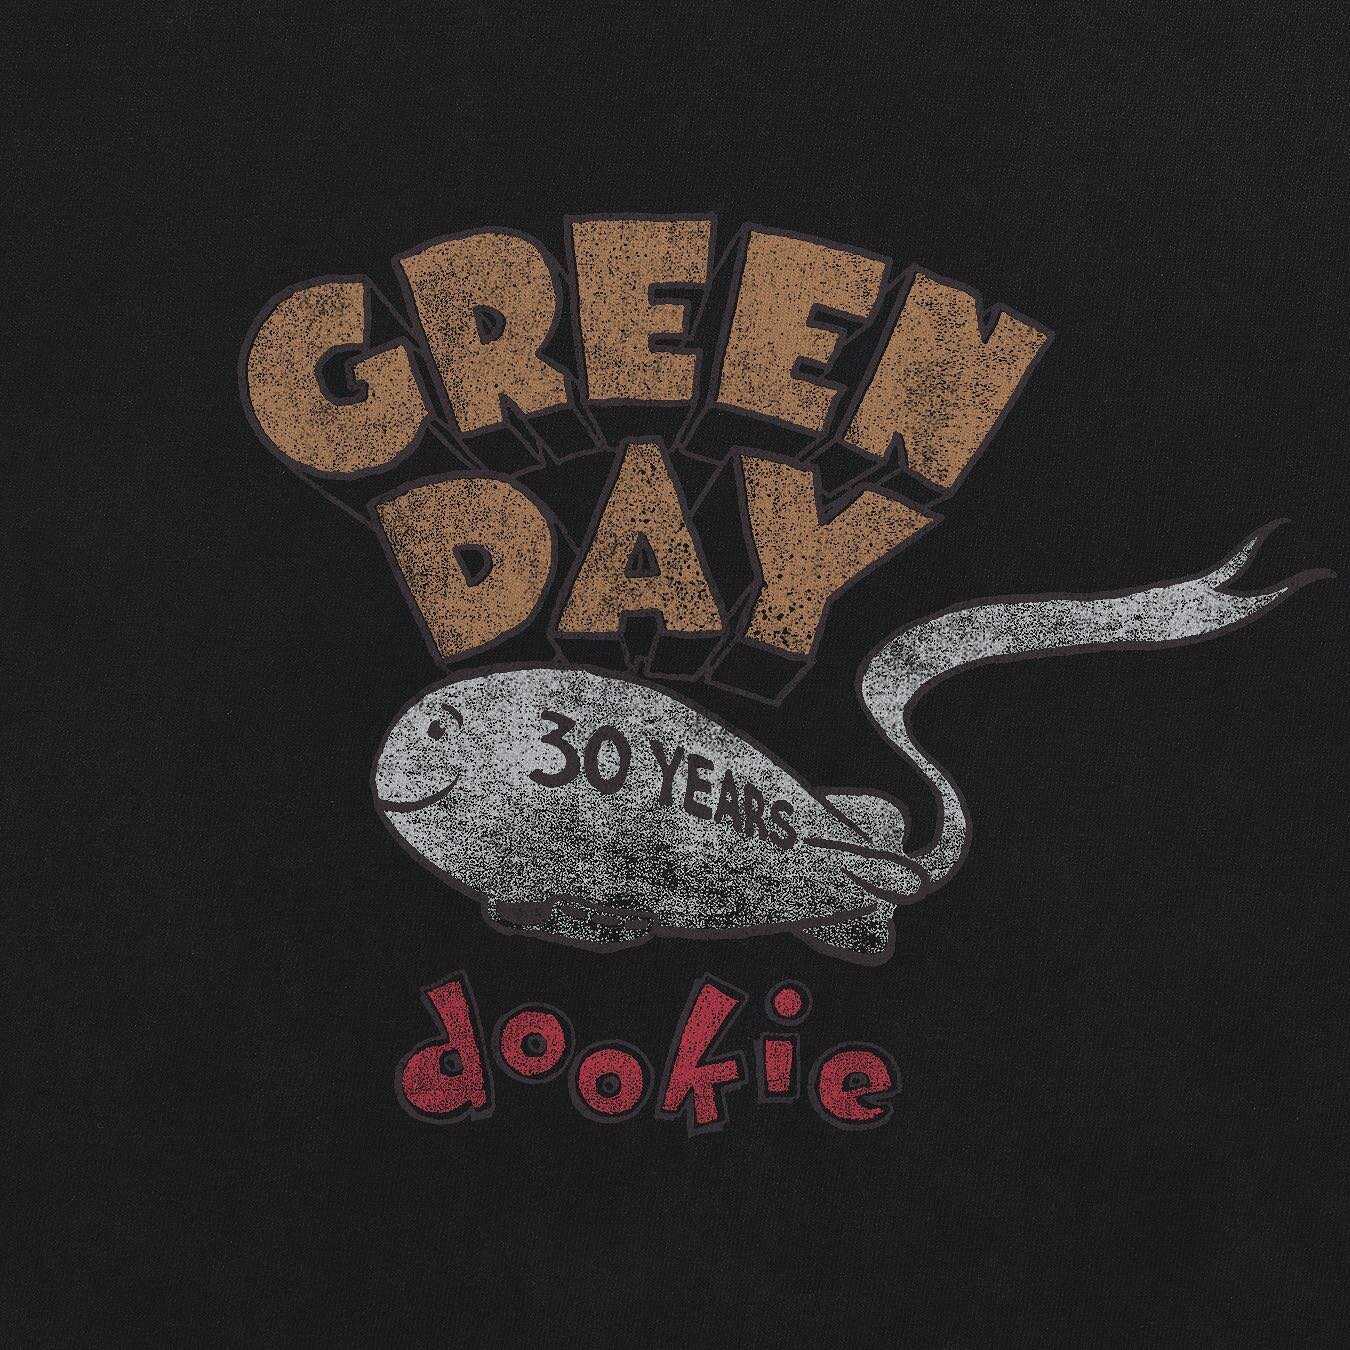 Have ya heard? Dookie turned 30! 

One of two designs I had the privilege to draw up for @greenday&rsquo;s 30th anniversary of Dookie. An absolute blast of a project, digging through the original art by the genius Richie Bucher.

Huge thank you to @g